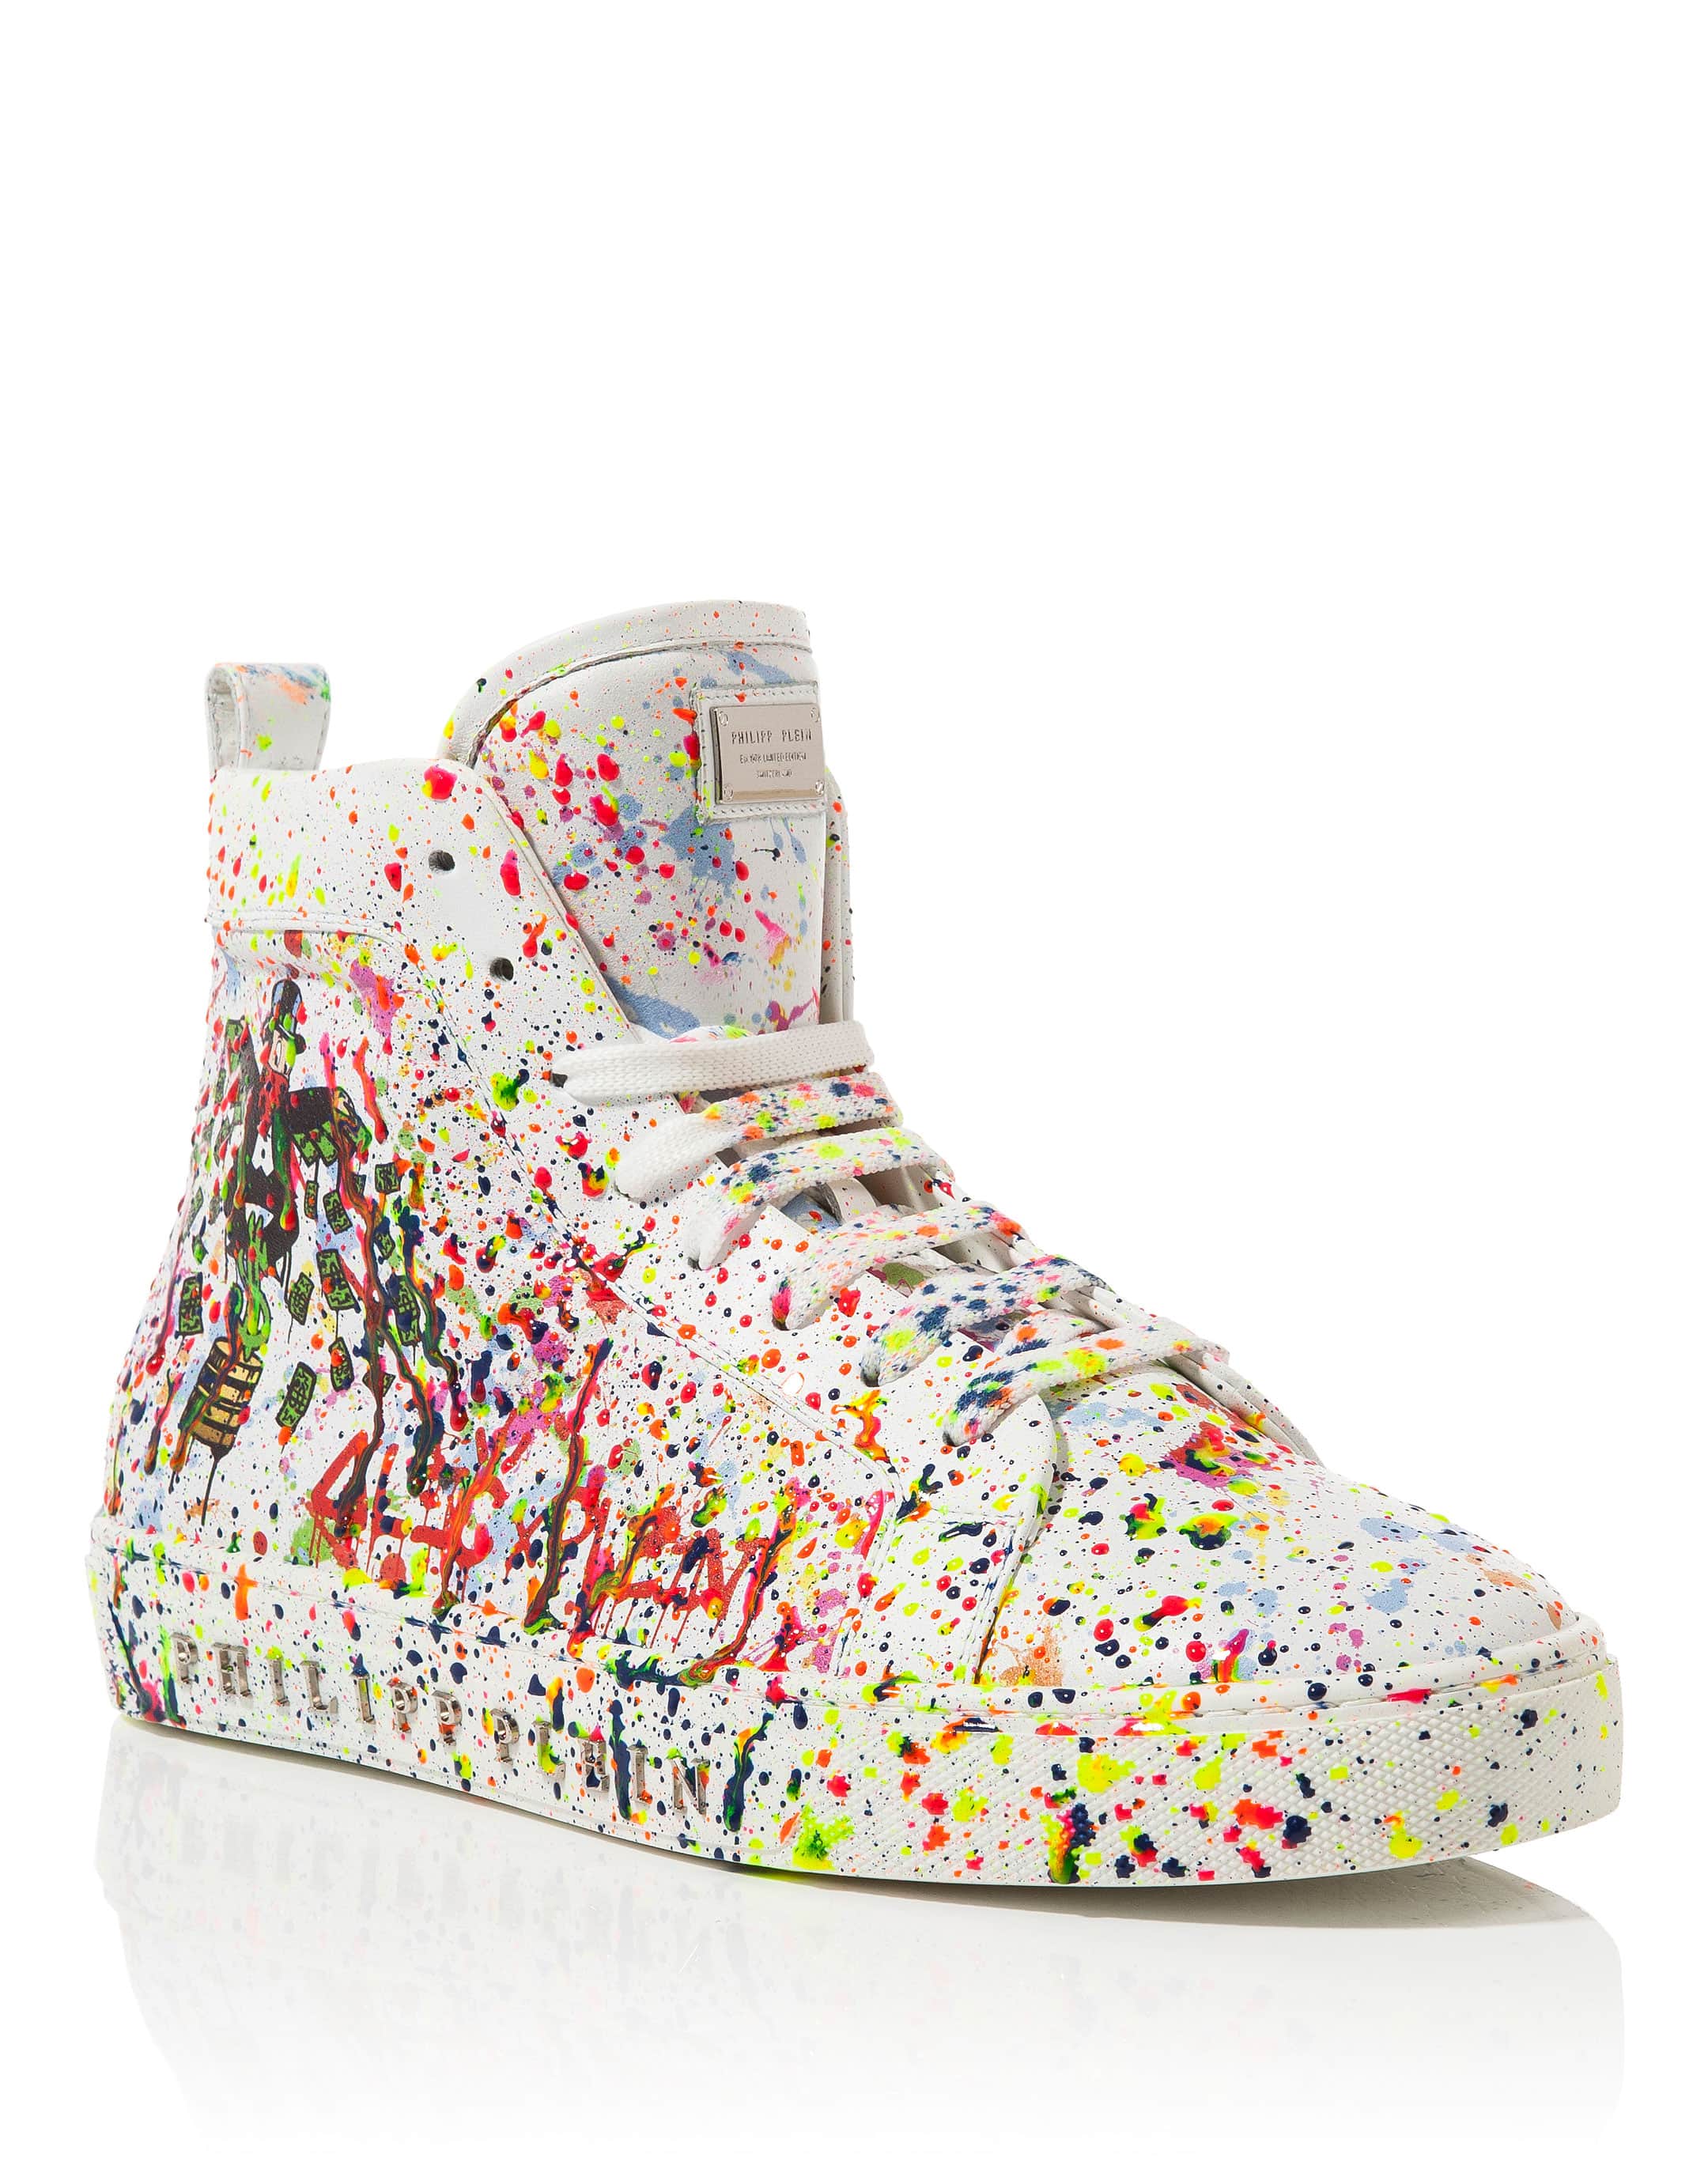 activation difference Wait a minute Philipp Plein Alec Monopoly "Alec Two" Hi-Top Sneakers –  Marinaloanandjewelry